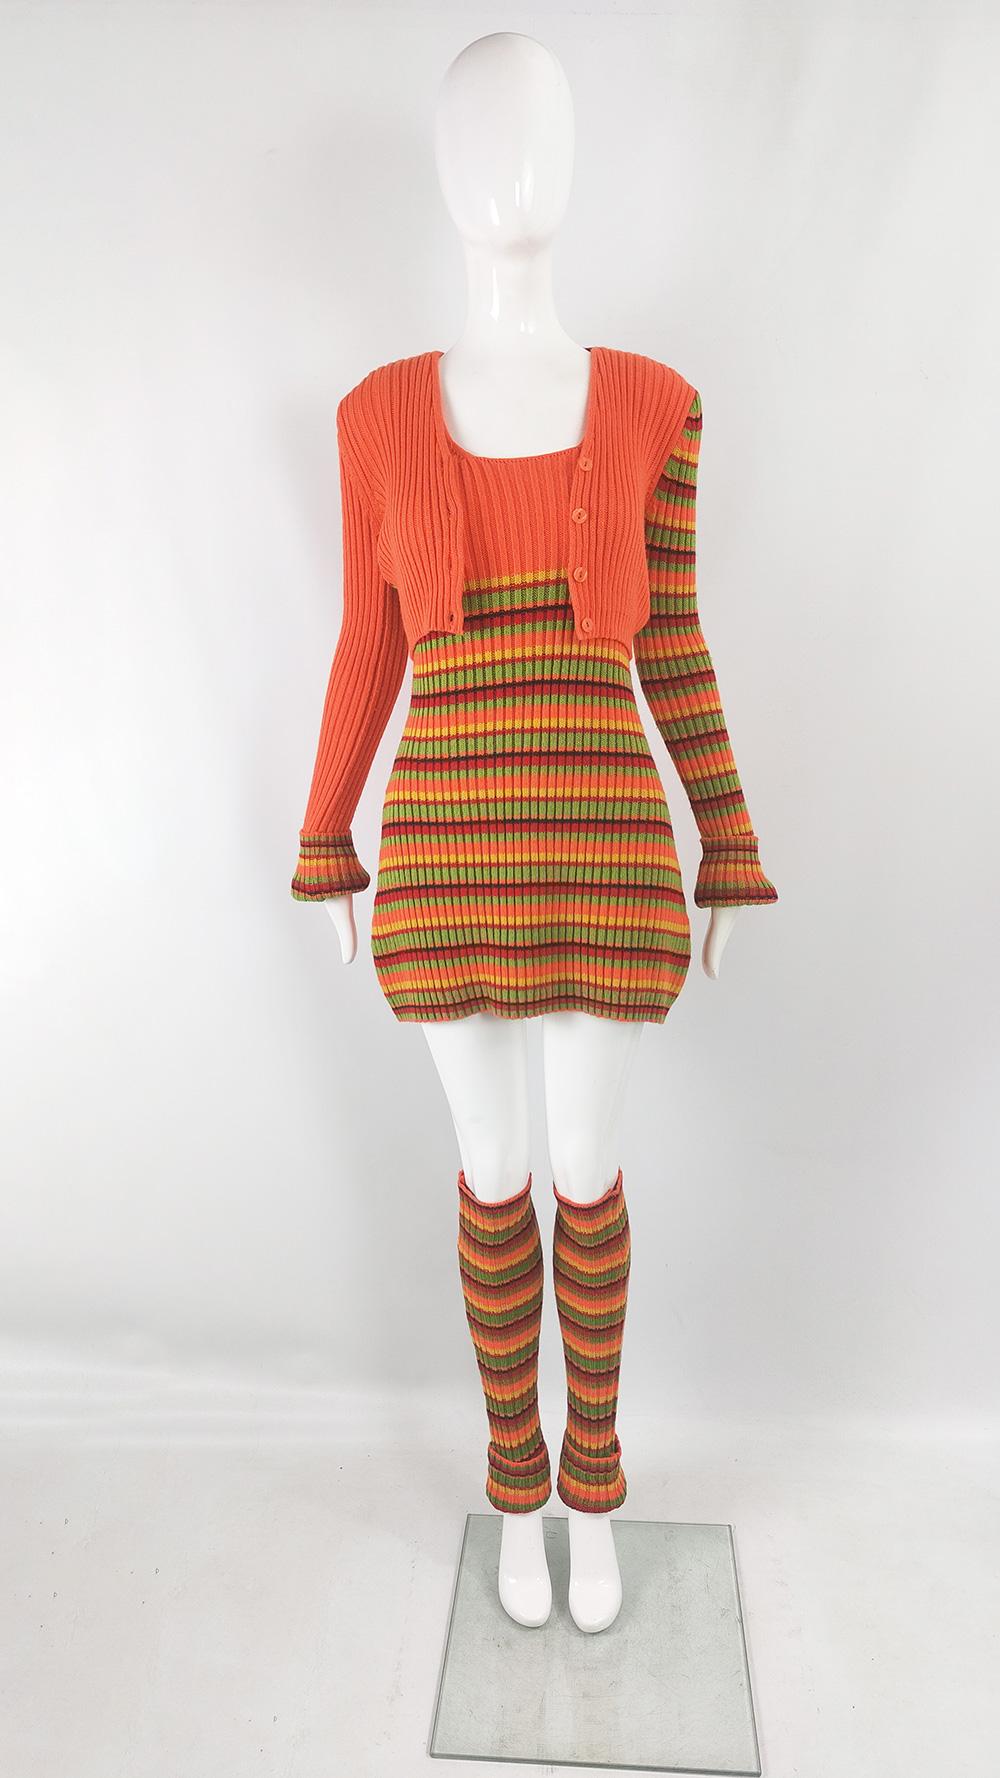 A fabulous and rare vintage womens 3 piece dress set from the early 2000s by luxury French label, Aridza Bross, best known for championing a 70s revival aesthetic in the late 90s and early 2000s. In an orange, green and yellow striped knit fabric -